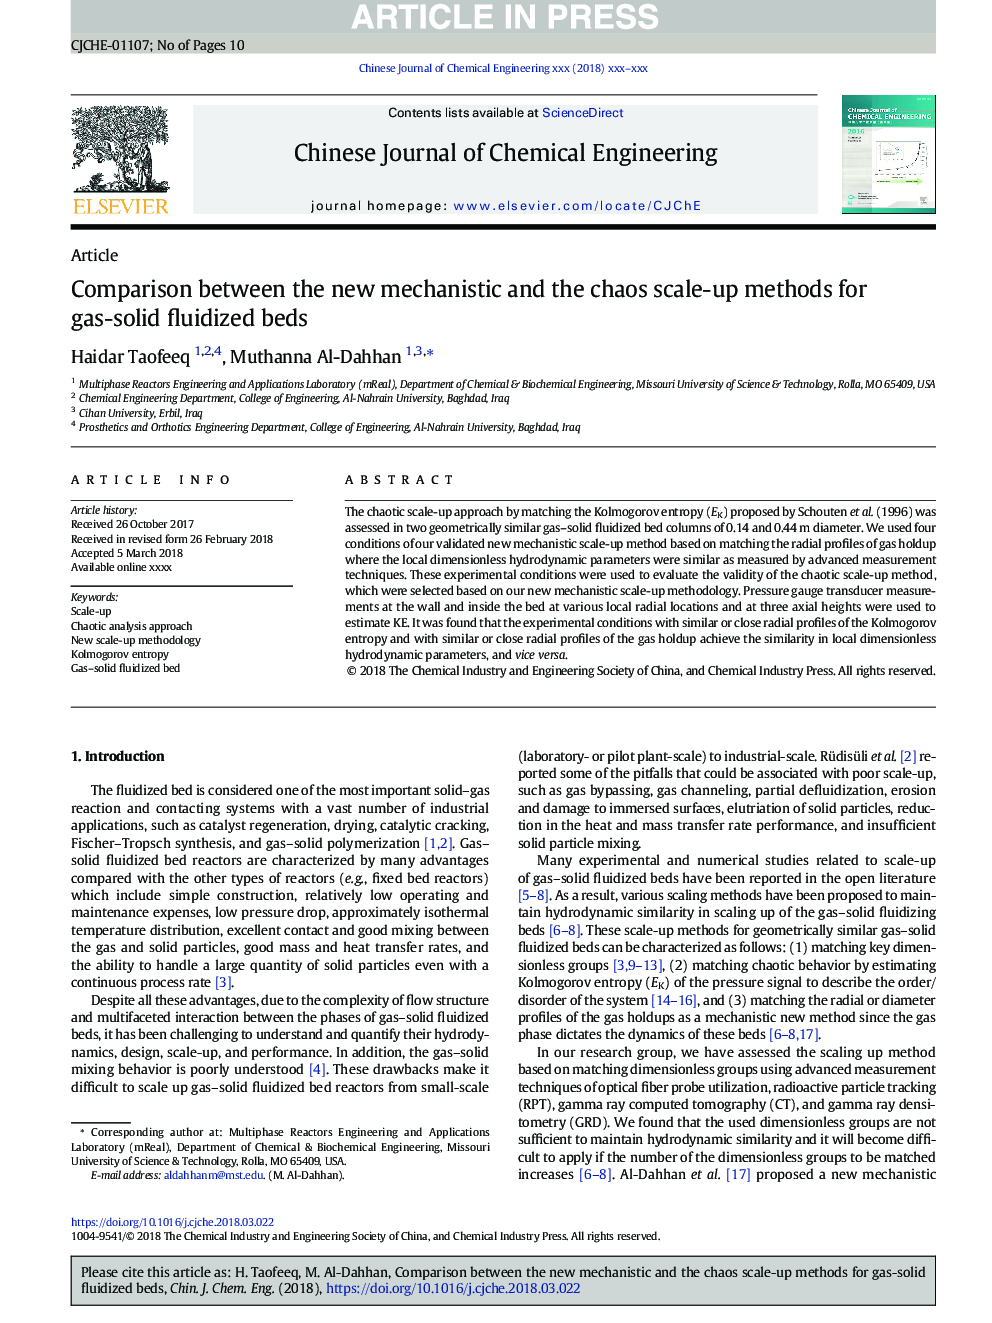 Comparison between the new mechanistic and the chaos scale-up methods for gas-solid fluidized beds